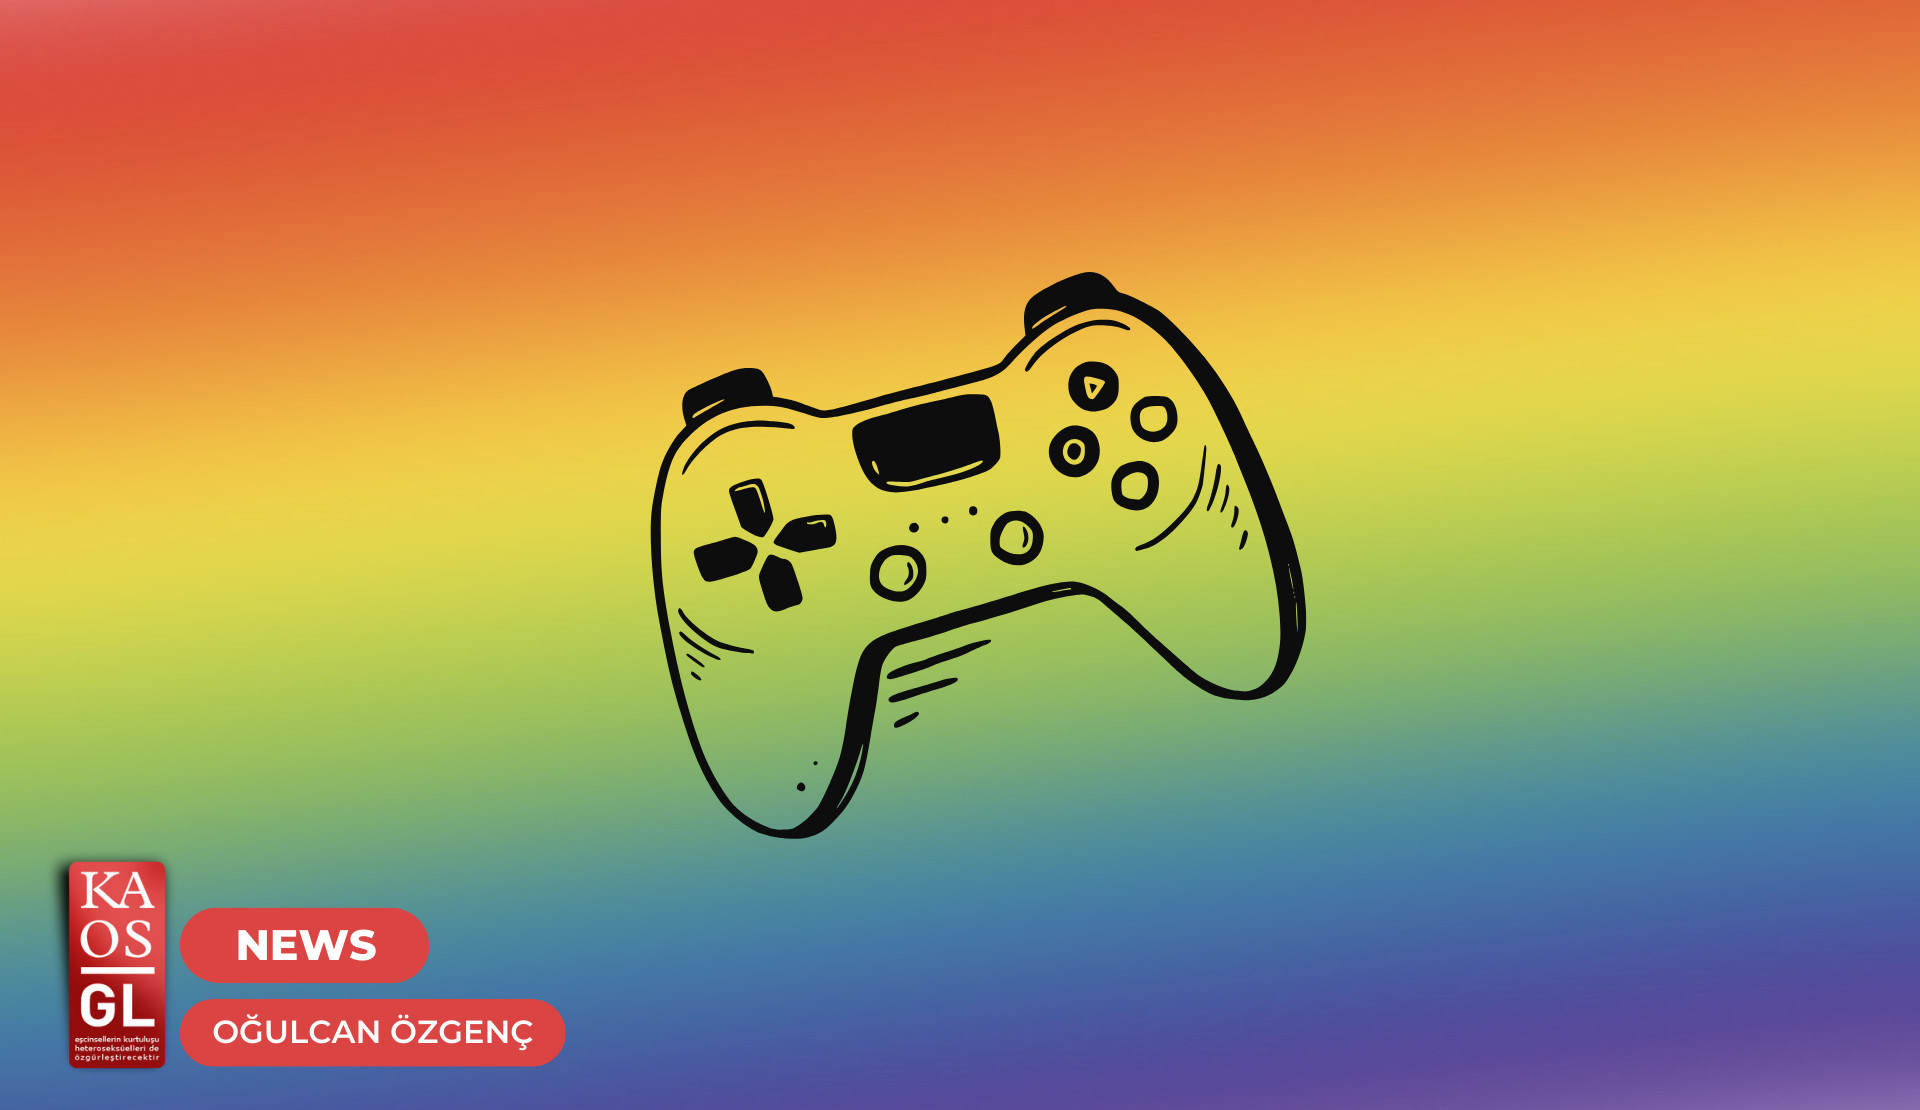 The game industry failed in terms of LGBTQ+ rights Kaos GL - News Portal for LGBTI+